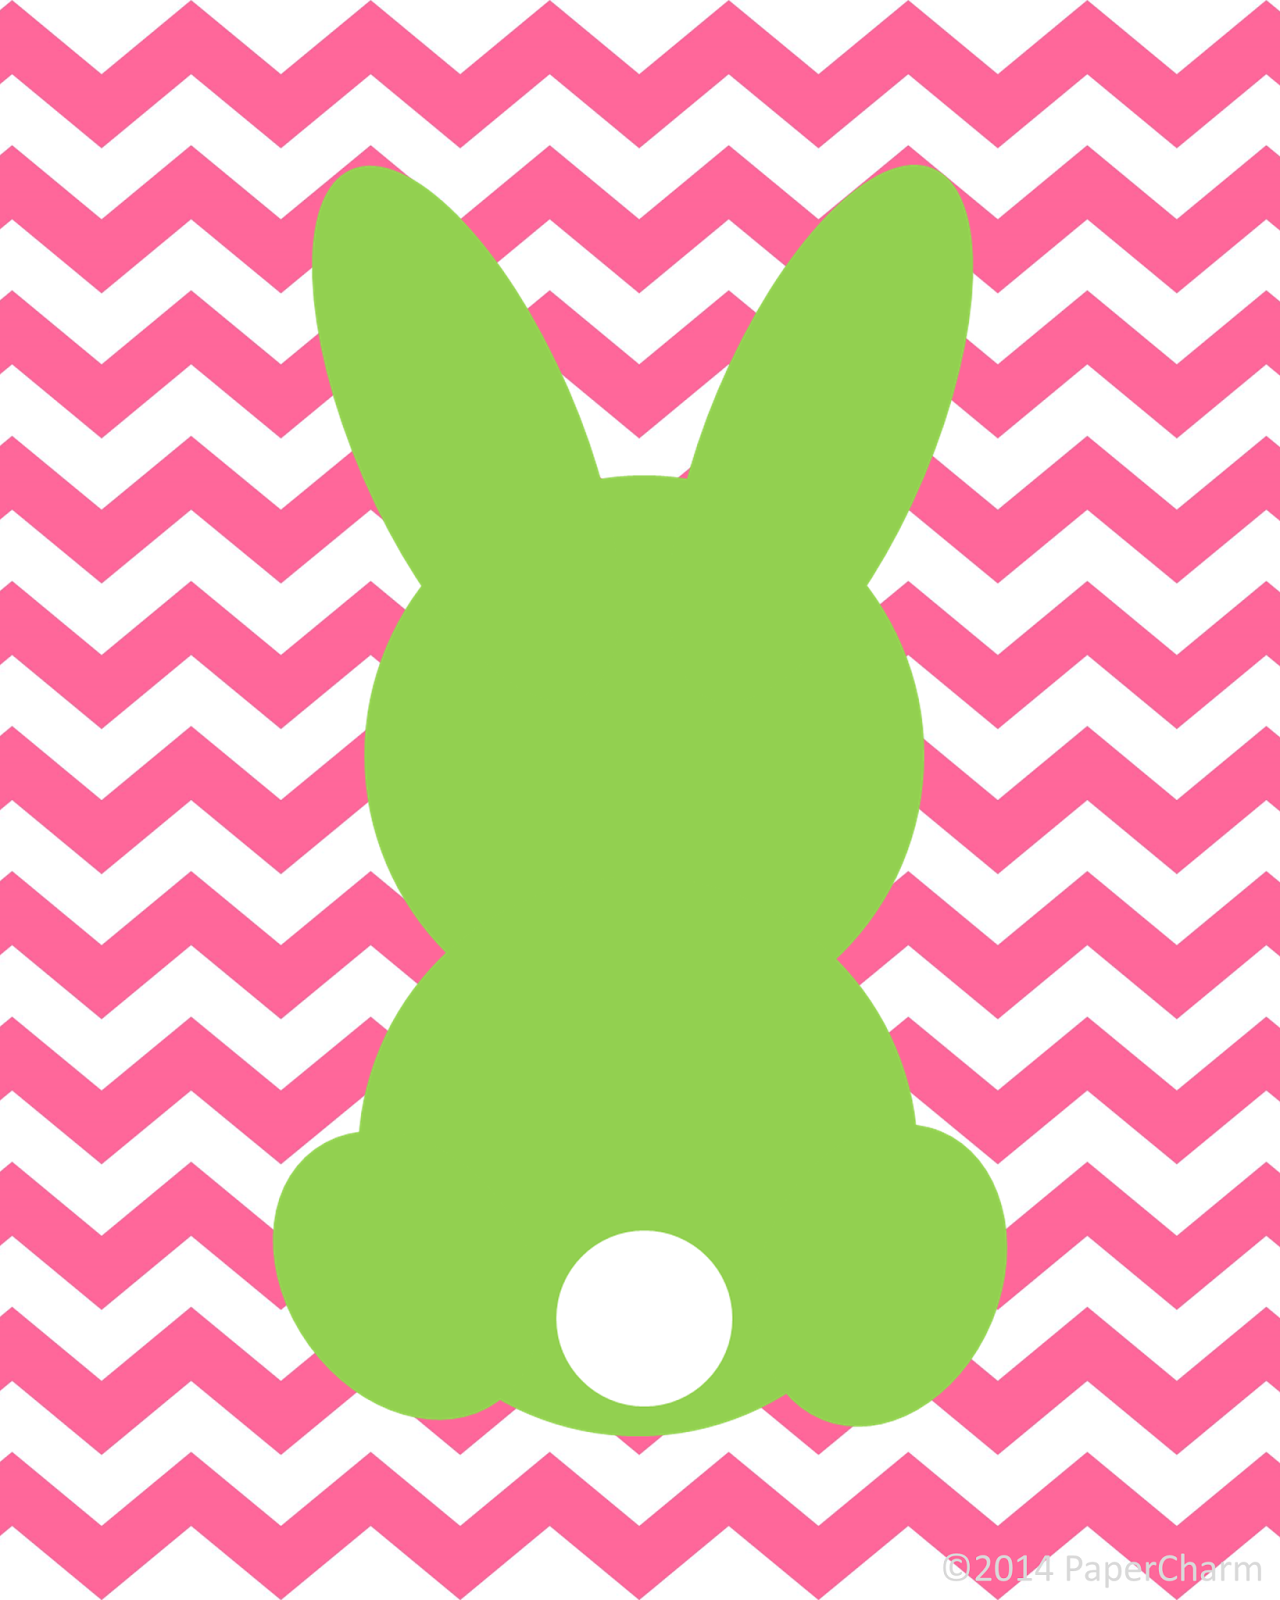 PaperCharm Free Bunny Silhouette Easter Printable Art